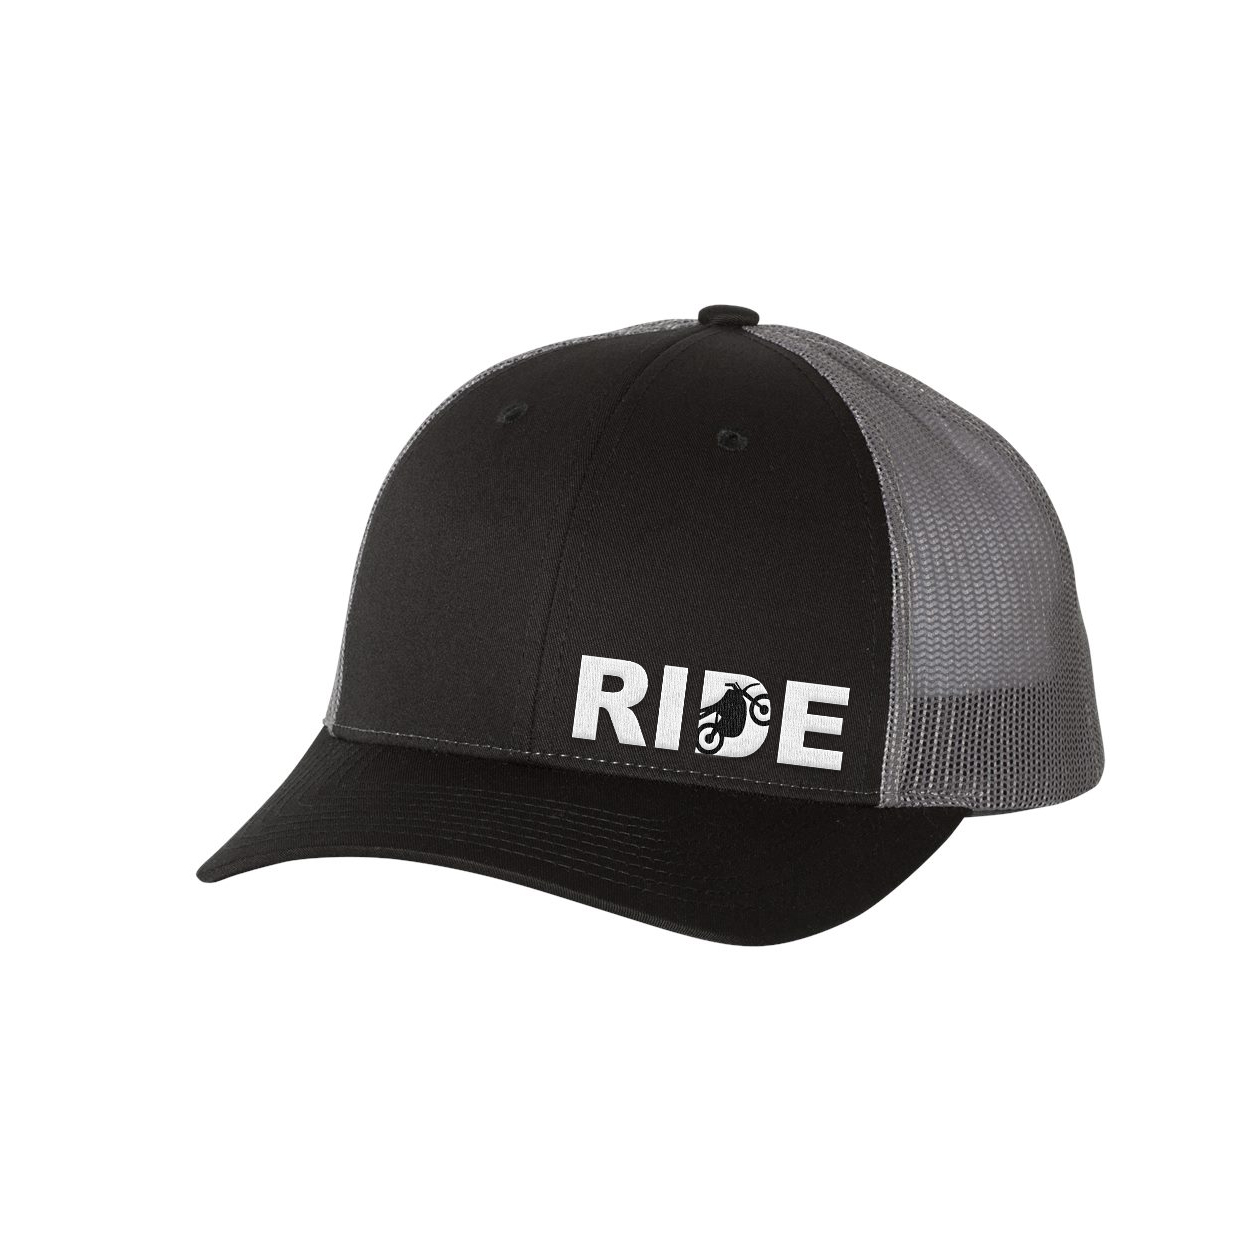 Ride Moto Logo Classic Pro Night Out Embroidered Snapback Trucker Hat Black/Gray